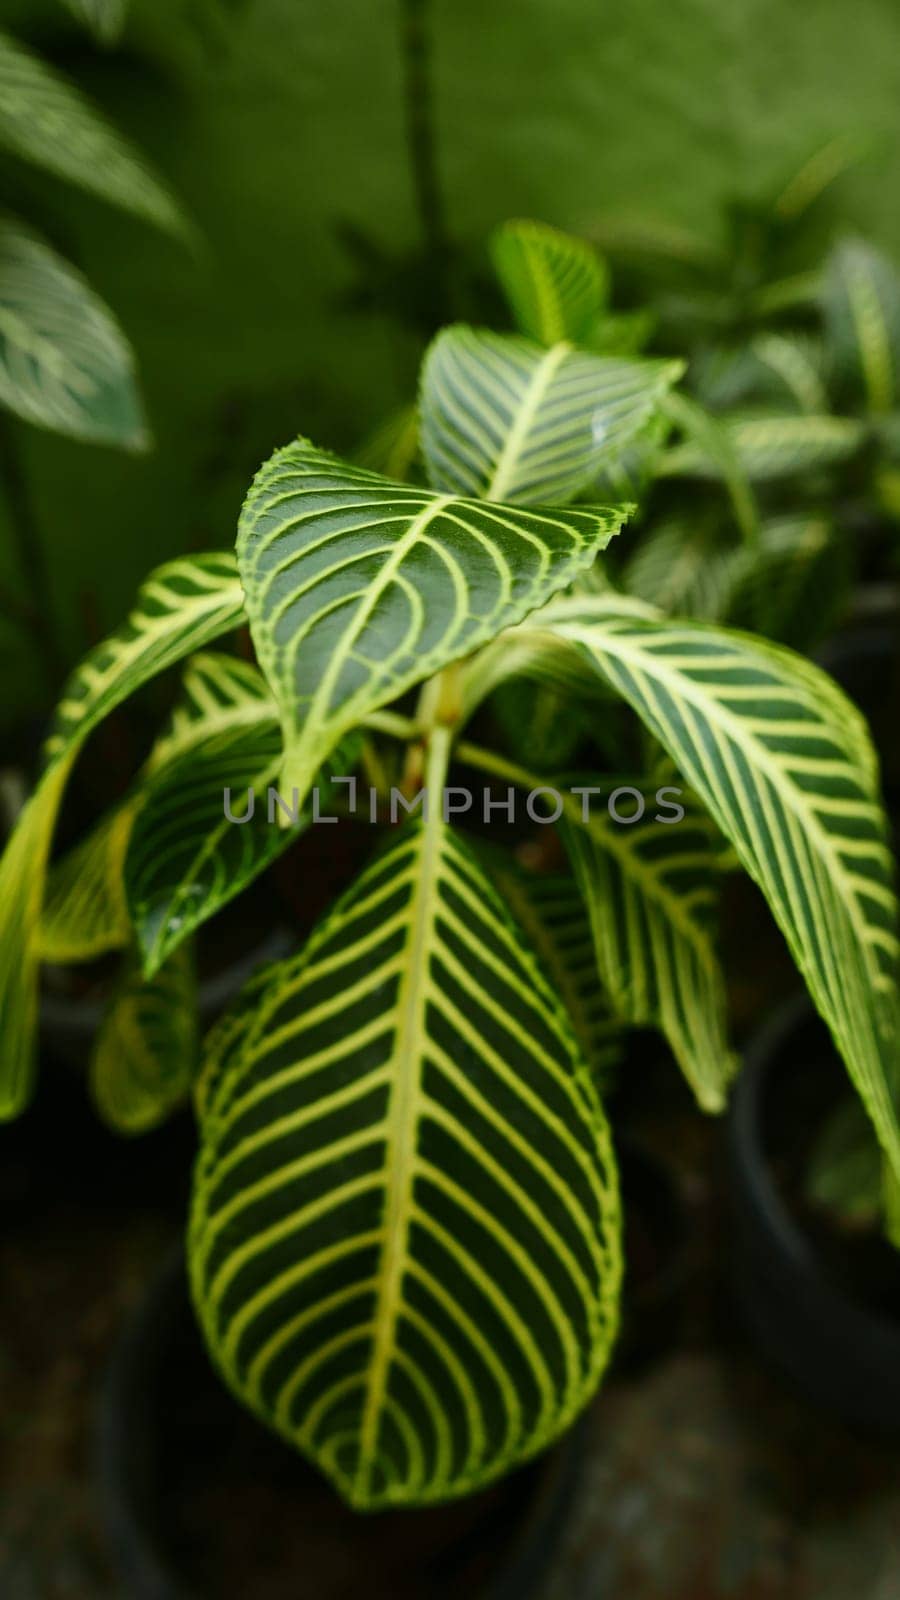 picture of leaves from a plant called Aphelandra squarrosa Nees, from the genus of Acanthaceae, or also known as Zebra Plant by antoksena